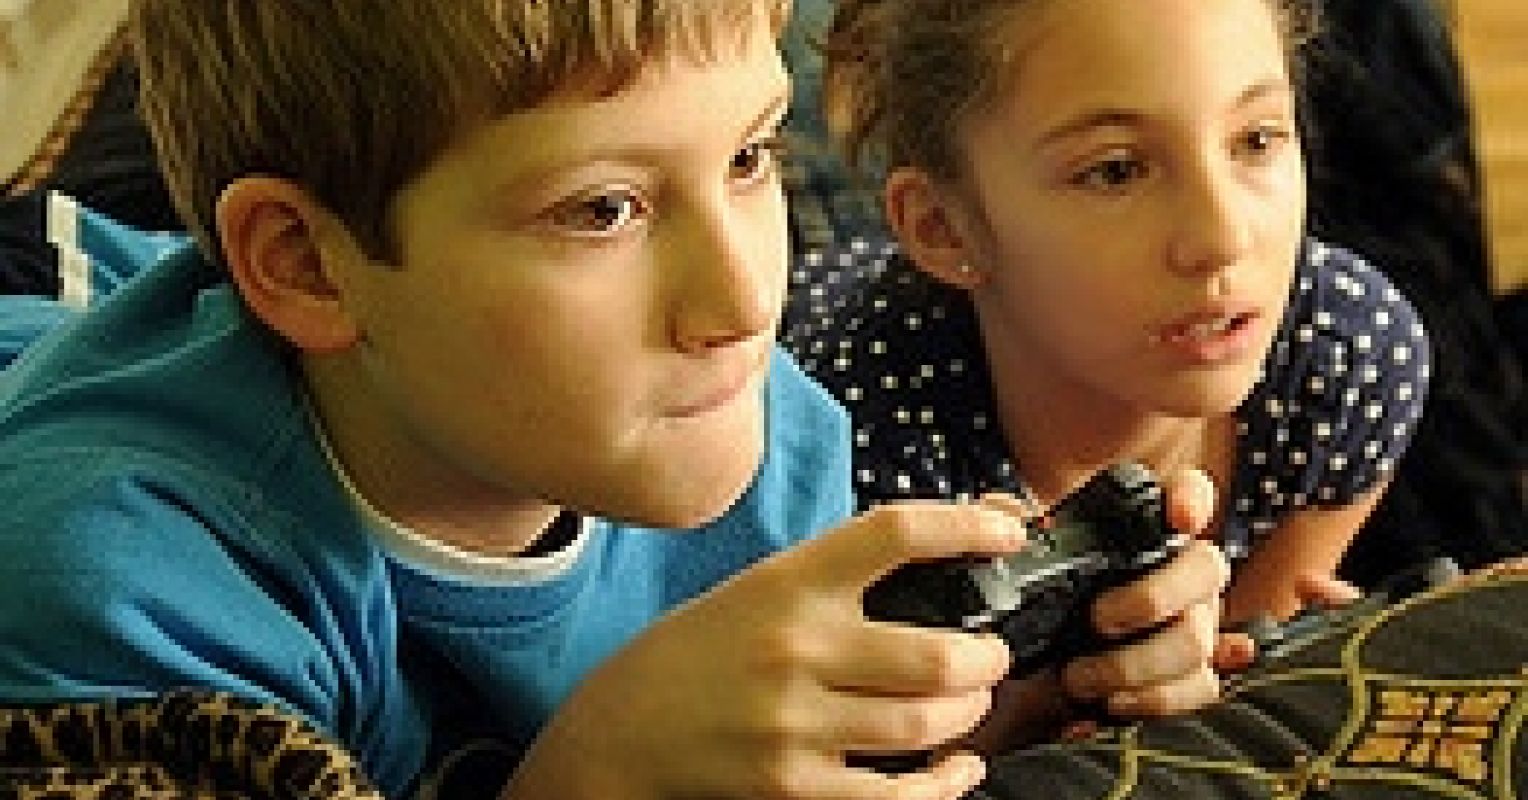 Can I Let One Kid Play Violent Video Games and Not the Other? — The  Information